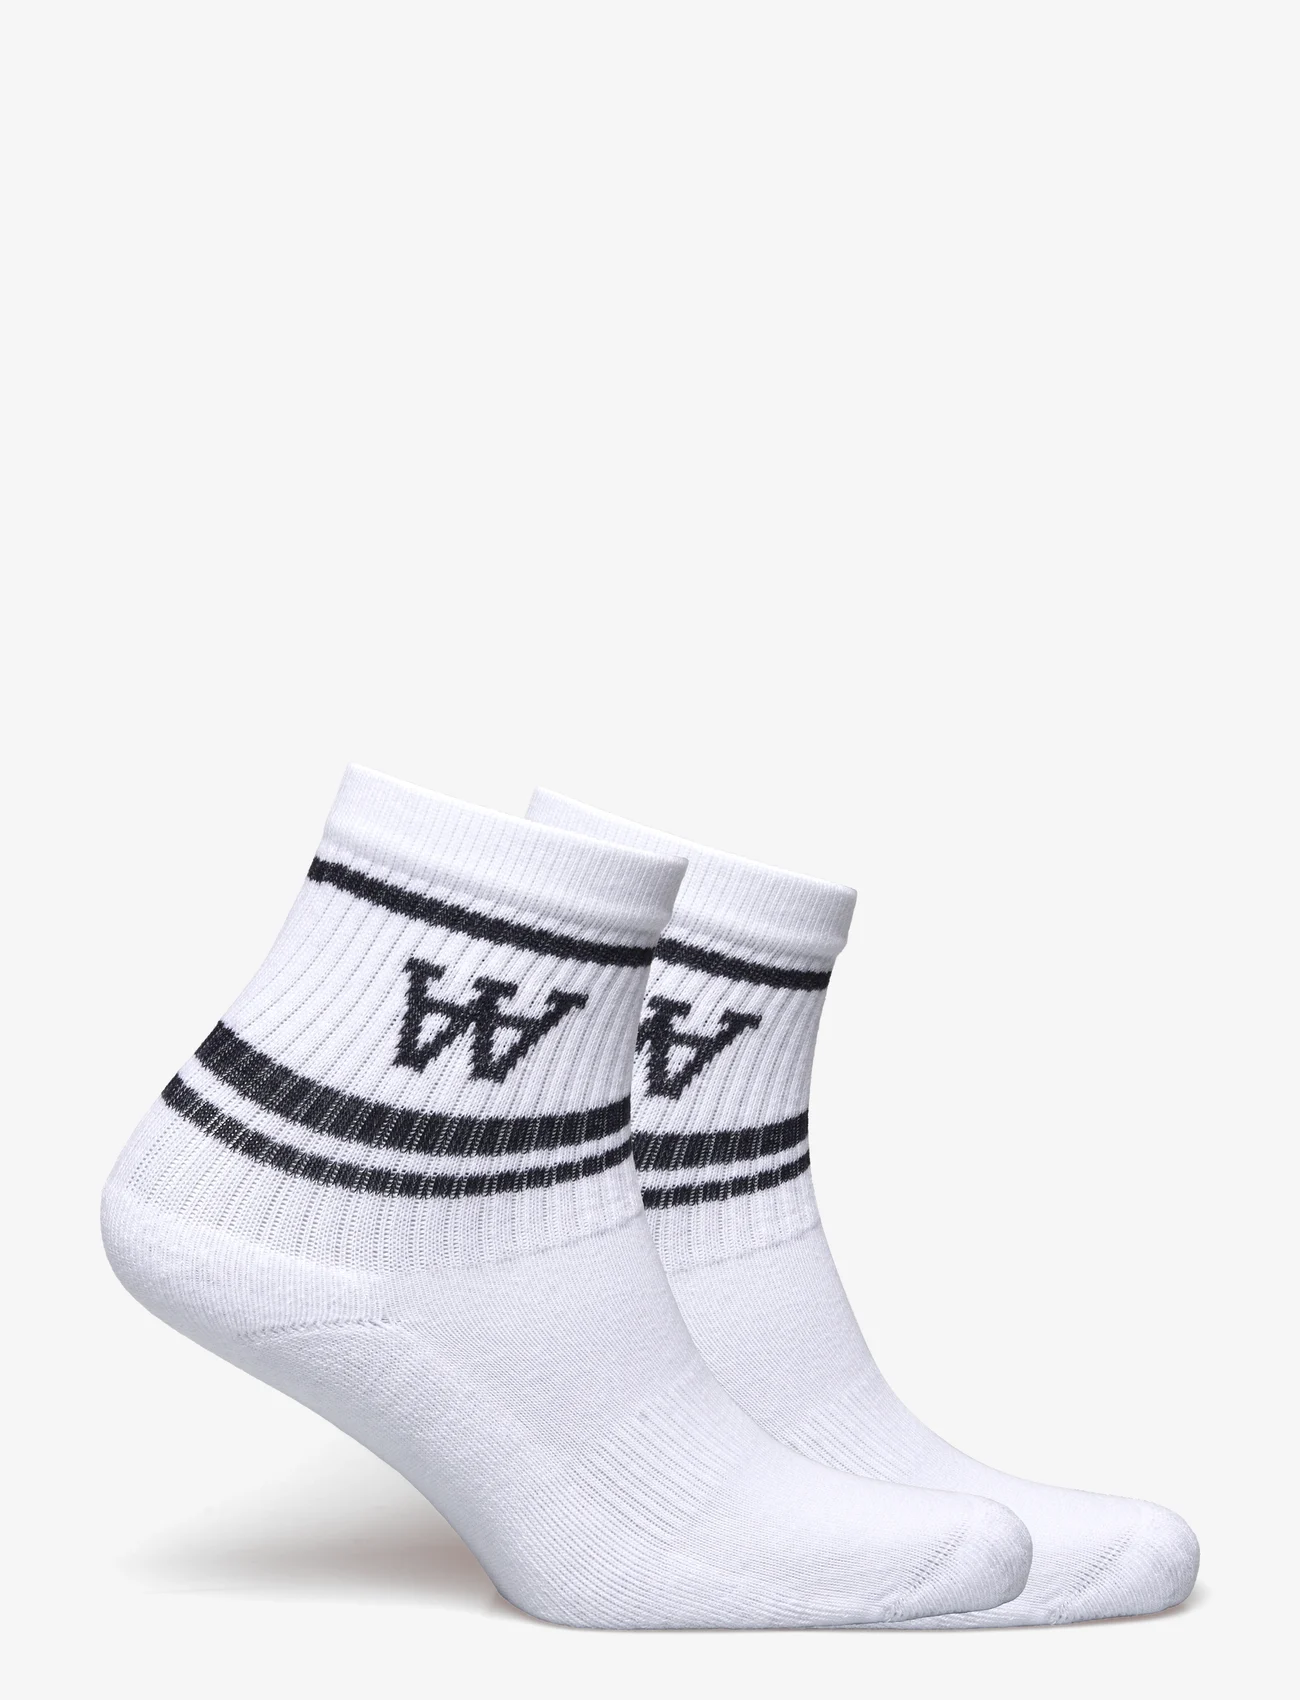 Wood Wood - Kids con 2-pack socks - lowest prices - white/navy - 1